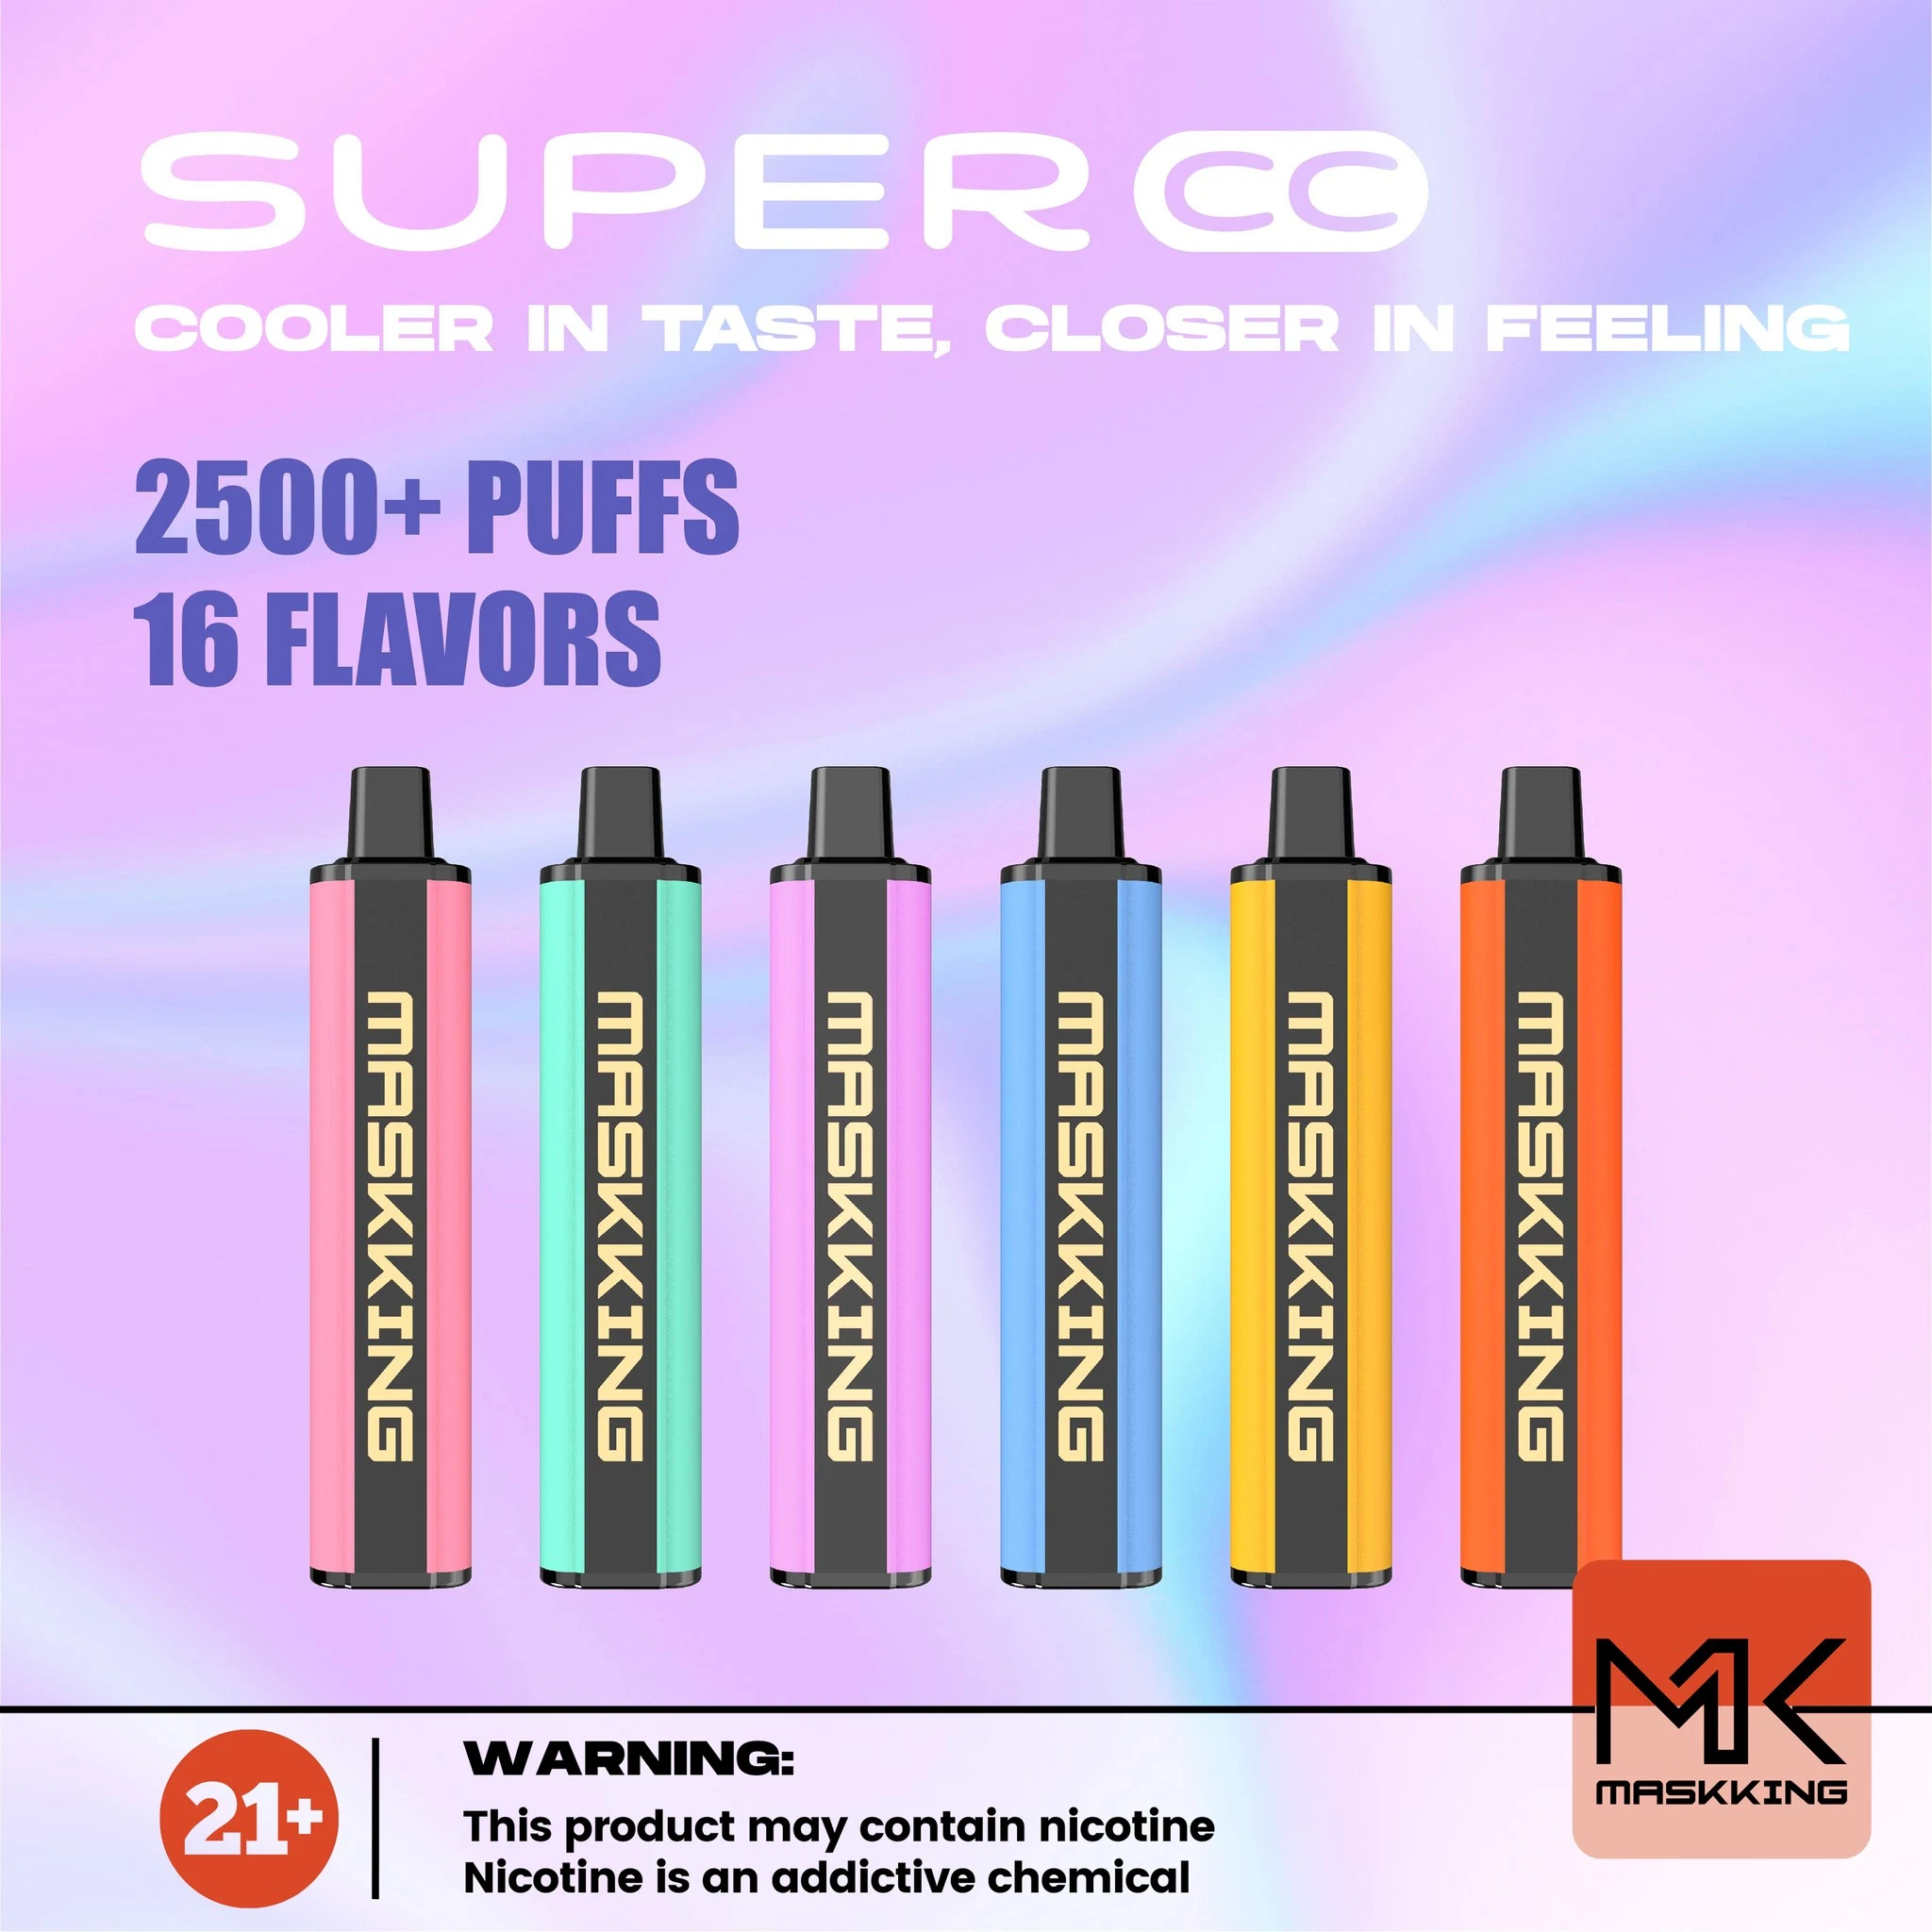 vape in Stock 2500 Puffs Maskking Super Cc 2% 5% Nicotine Disposable/Chargeable Vape